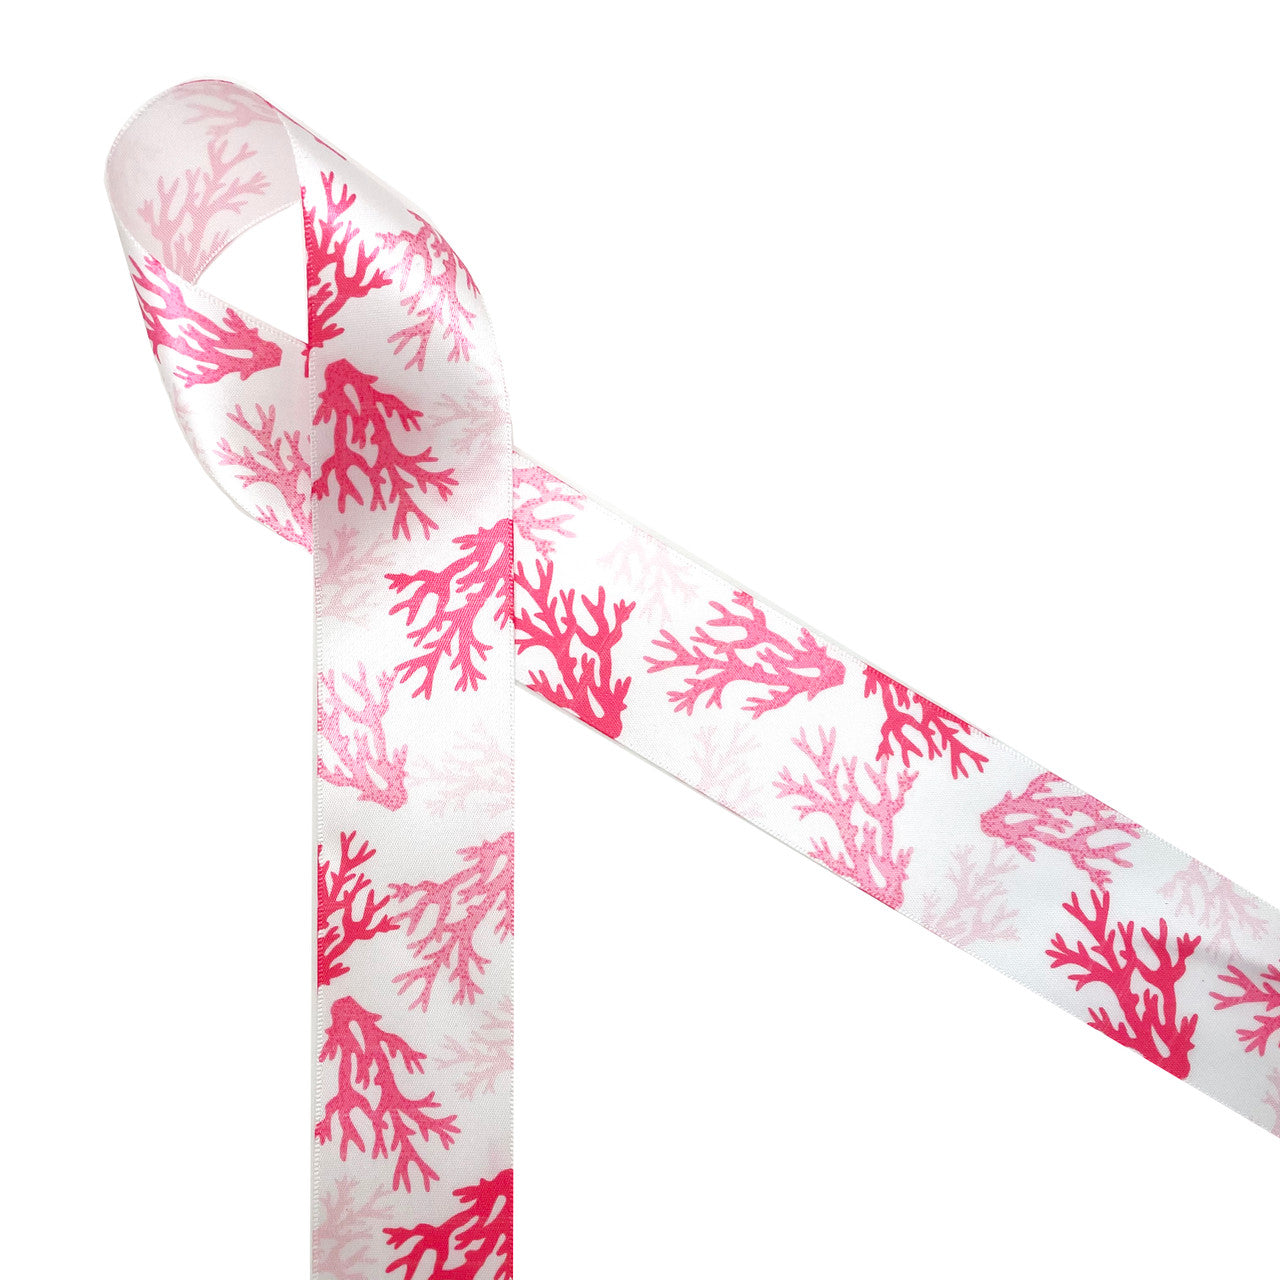 Coral Reef  patterns are trending in home decor and fashion! Our coral reef ribbon in shades of pink printed on 1.5" white single face satin is perfect for any beach, tropical or reef themed event! This is the perfect ribbon for tying gifts for a tropical themed wedding or bridal shower! Be sure to have this beautiful ribbon on hand for all you Summer crafting! Our ribbon is designed and printed in the USA